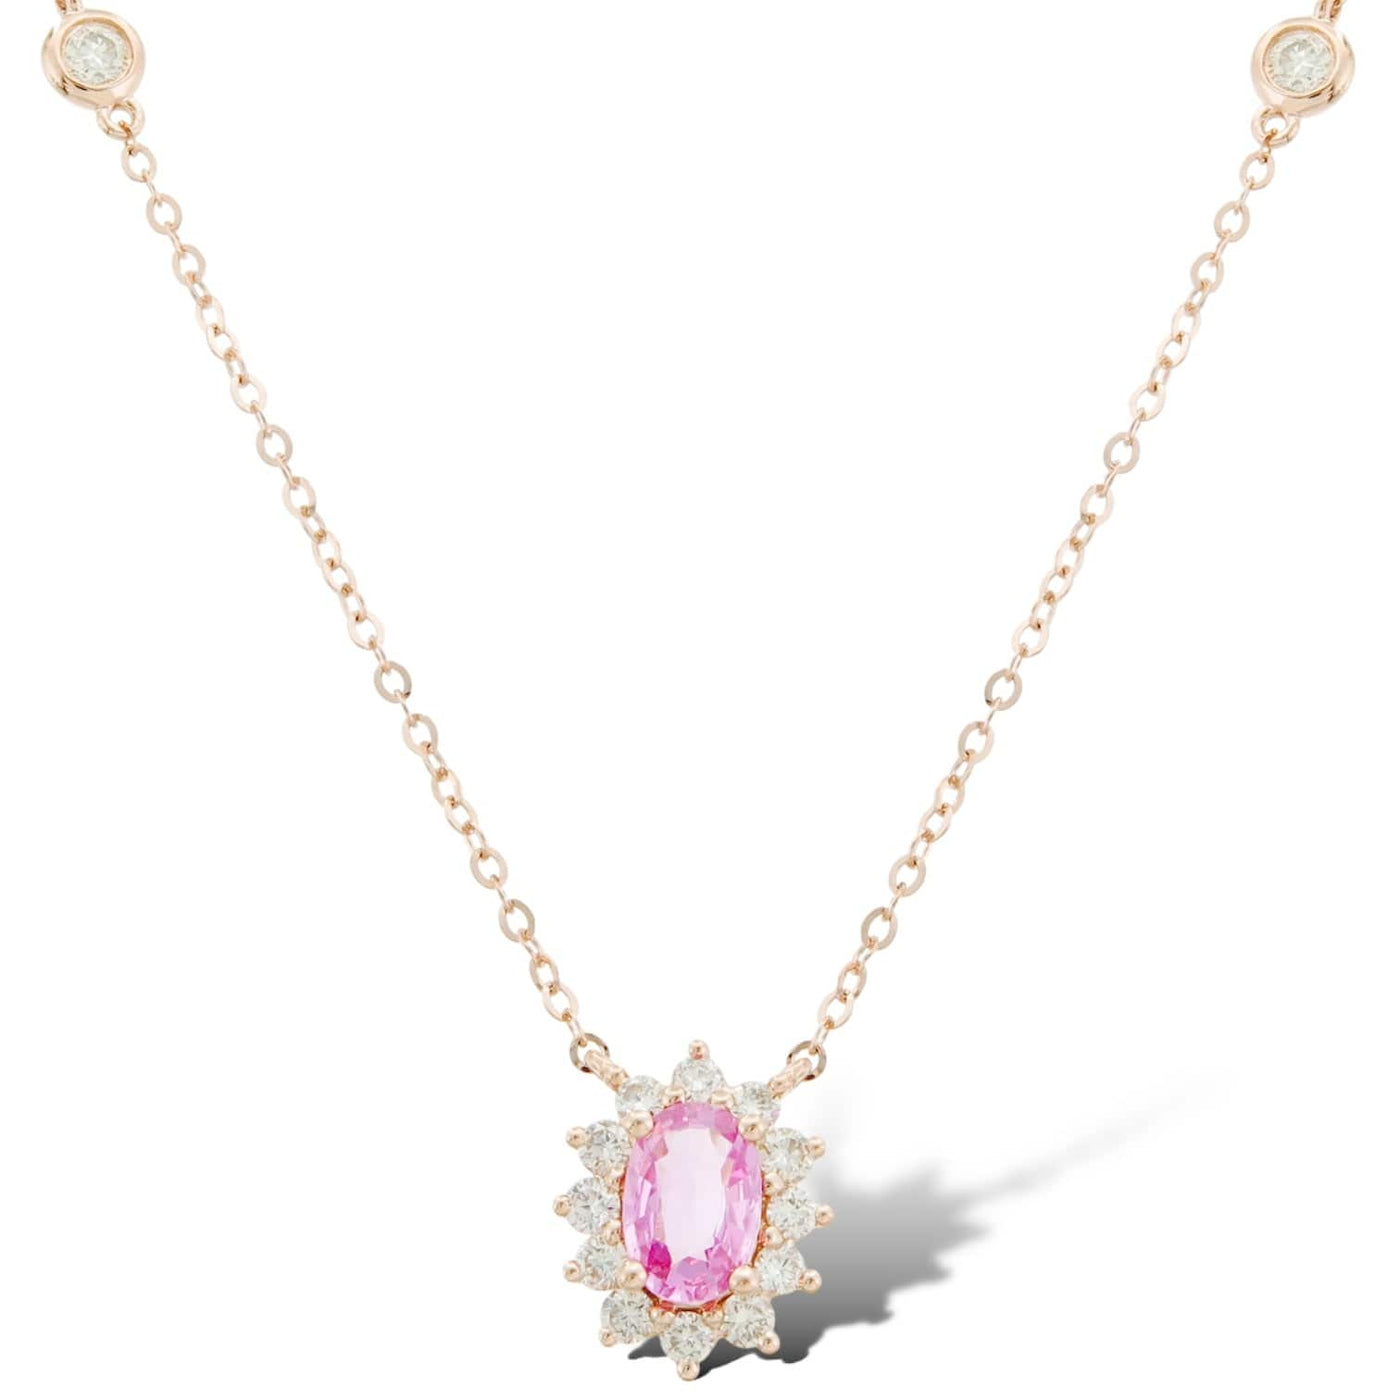 OVAL SHAPED DIANA PENDANT WITH PINK SAPPHIRE AND DIAMONDS